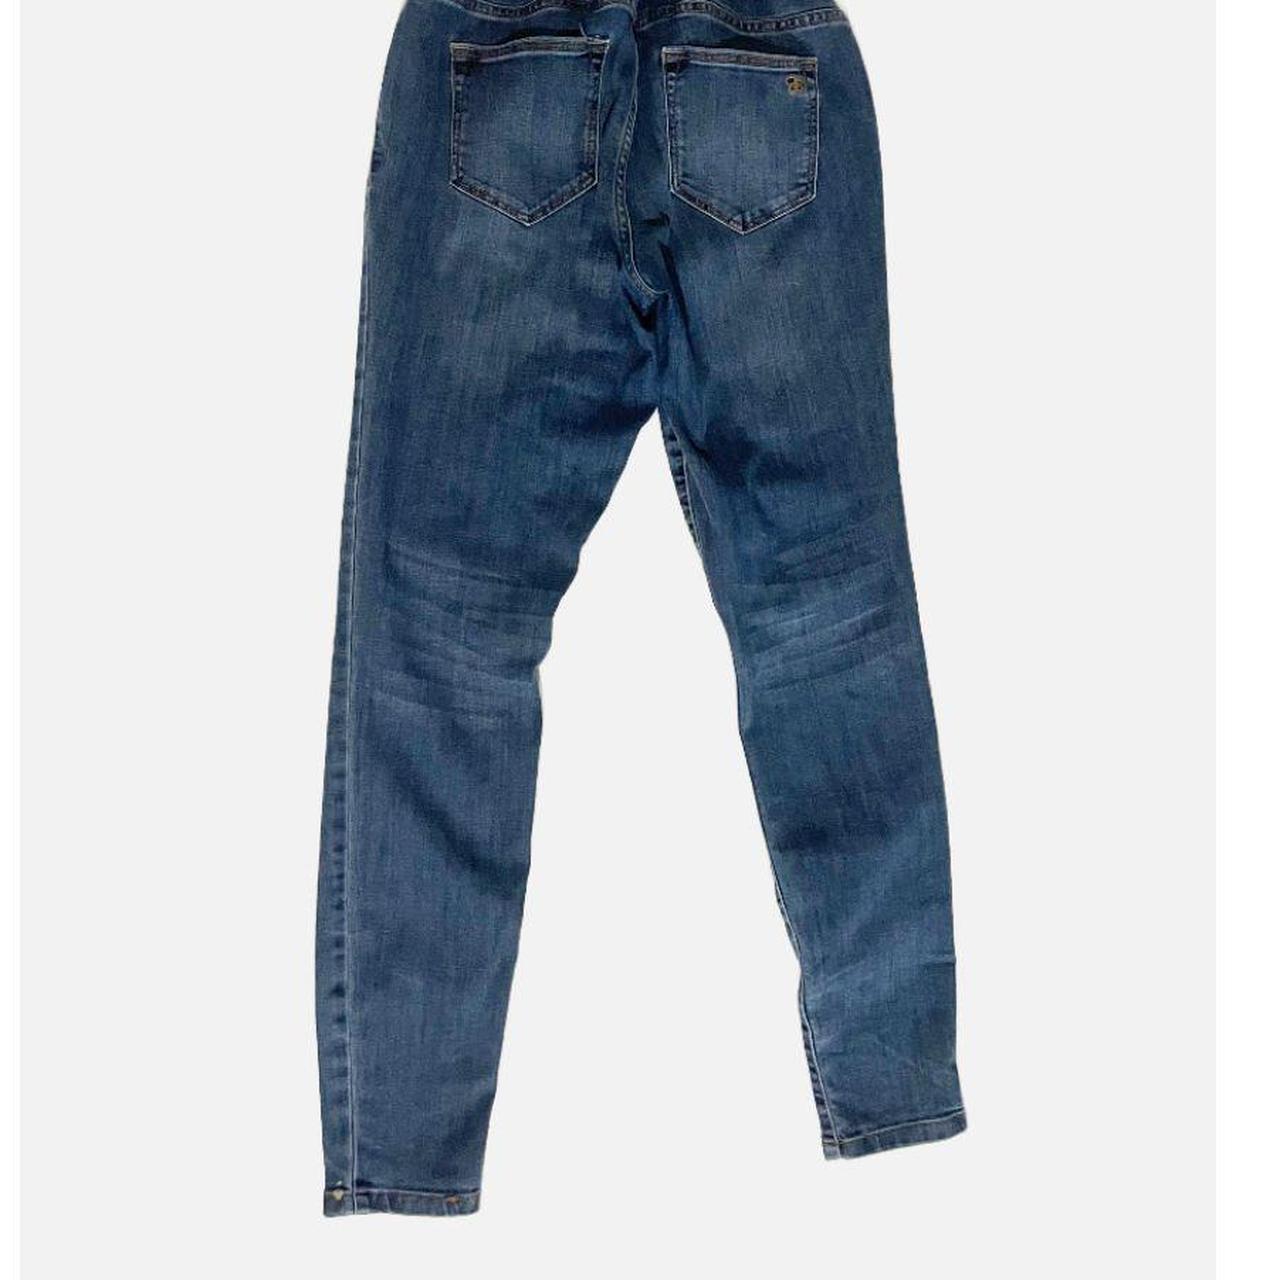 Product Image 4 - Jessica Simpson Distressed Maternity Jeans